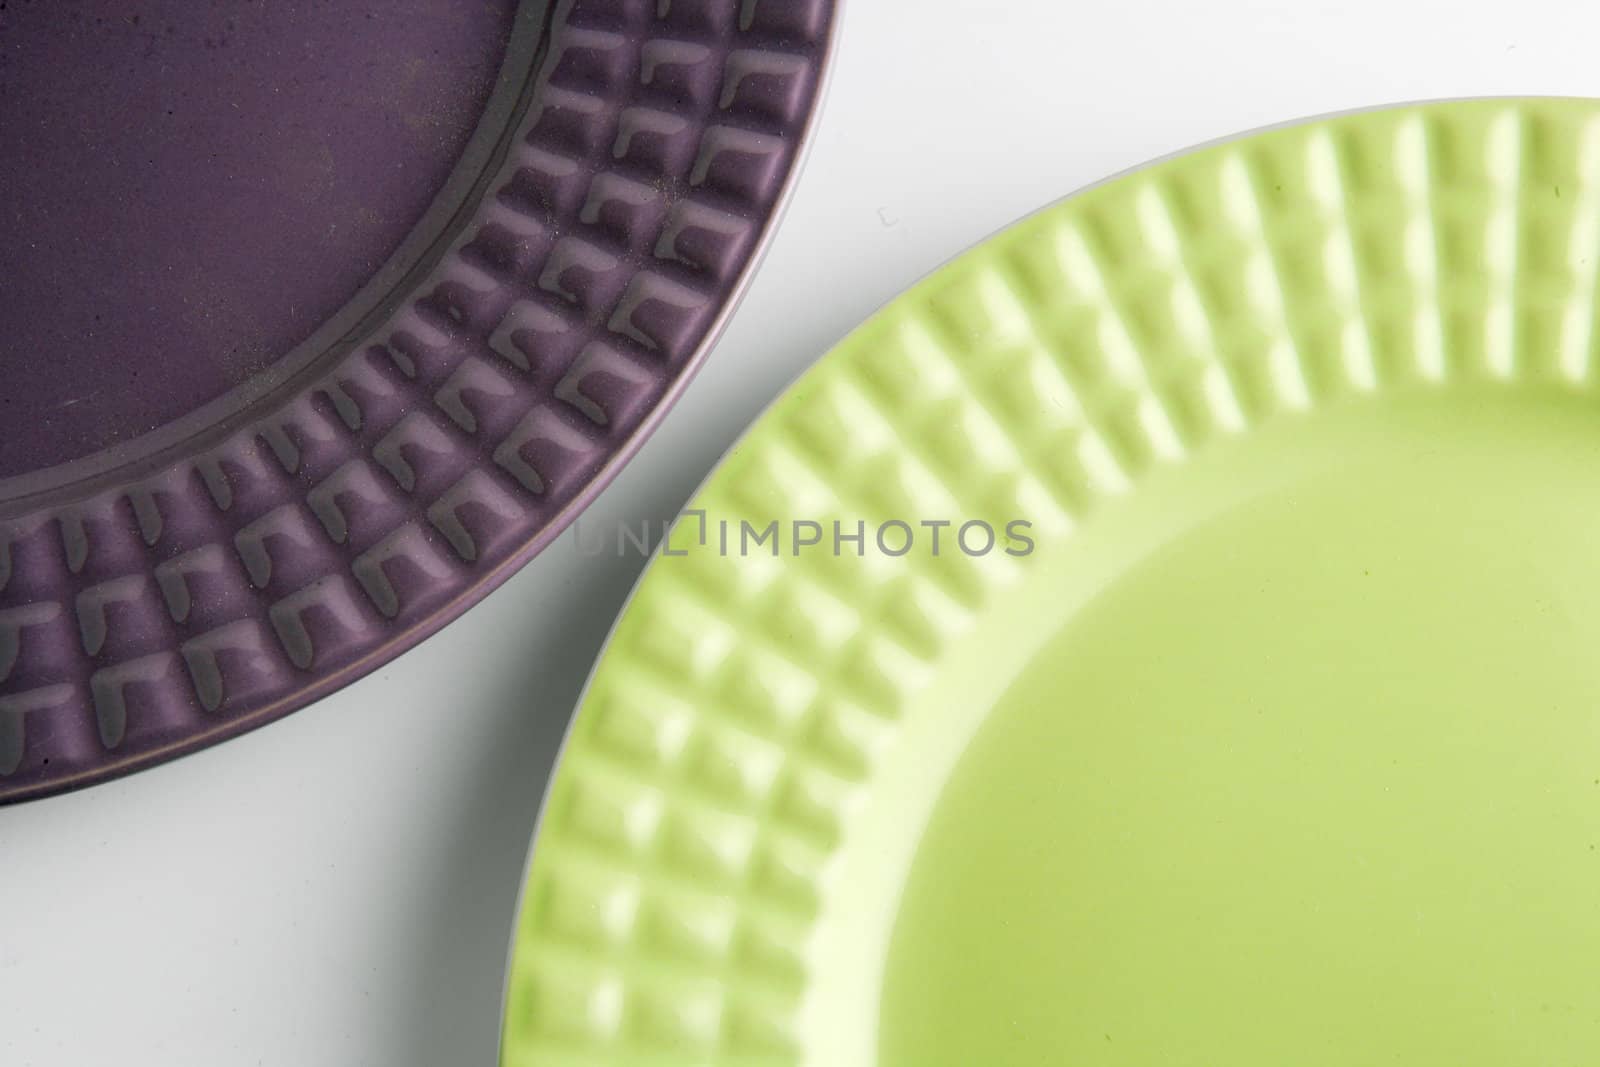 purple and green plates